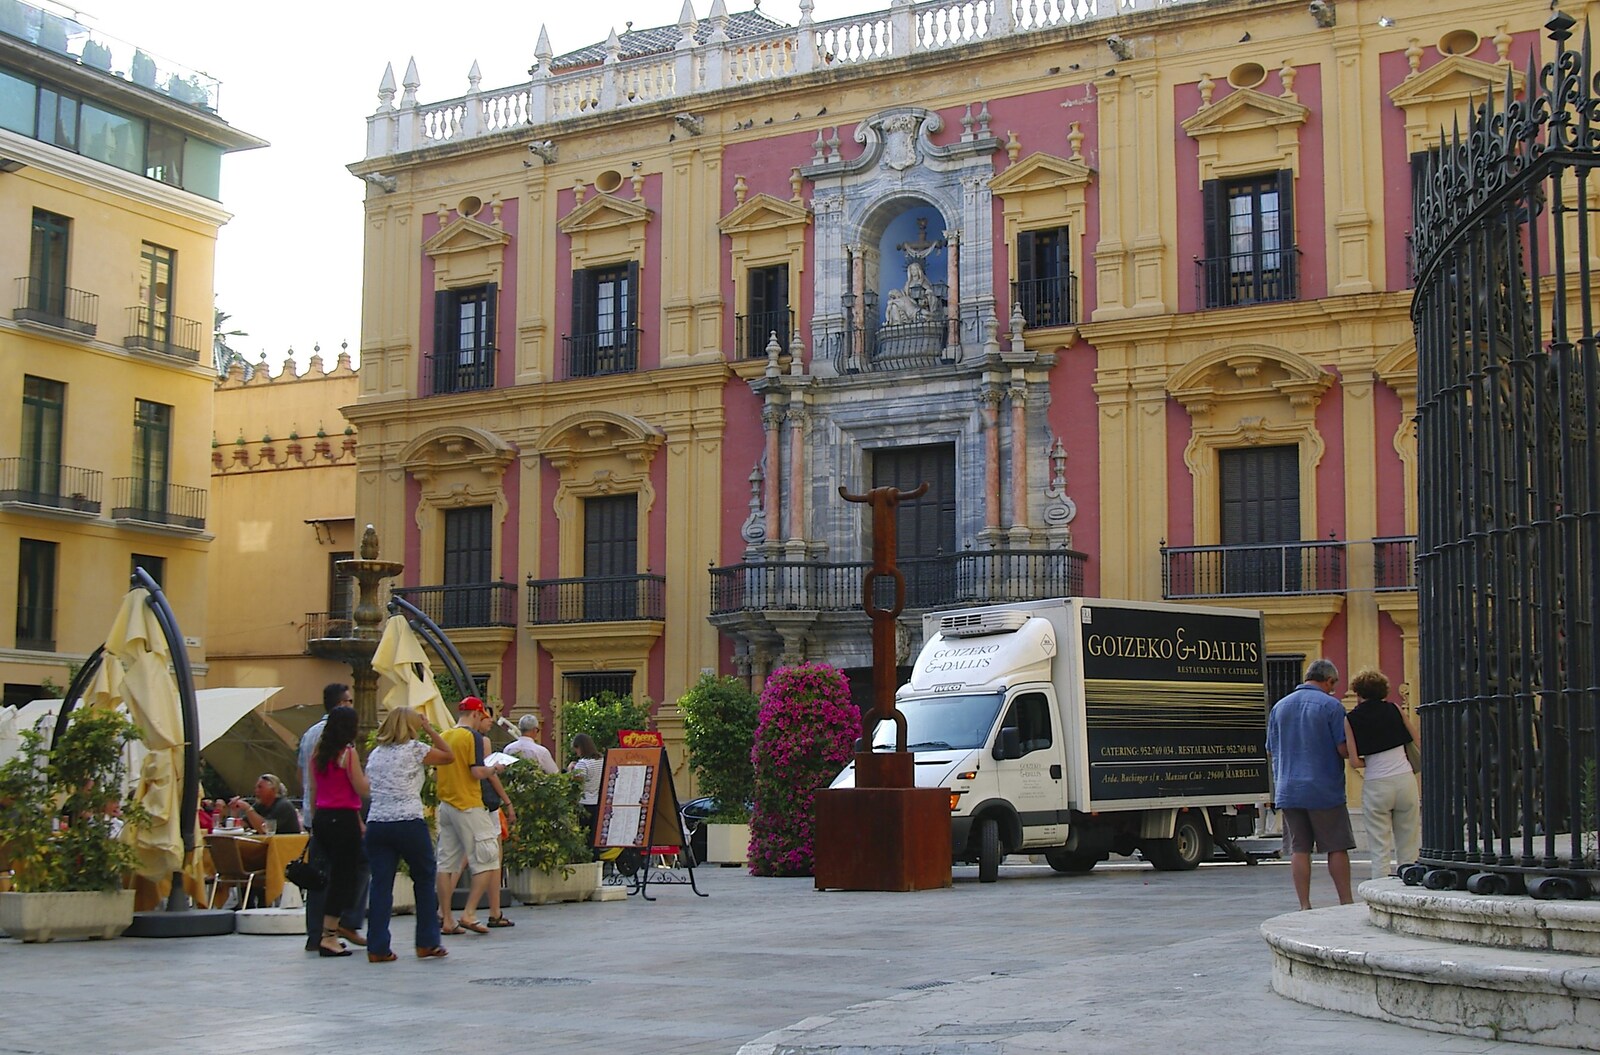 The square opposite the cathedral from Working at Telefónica, Malaga, Spain - 6th June 2006